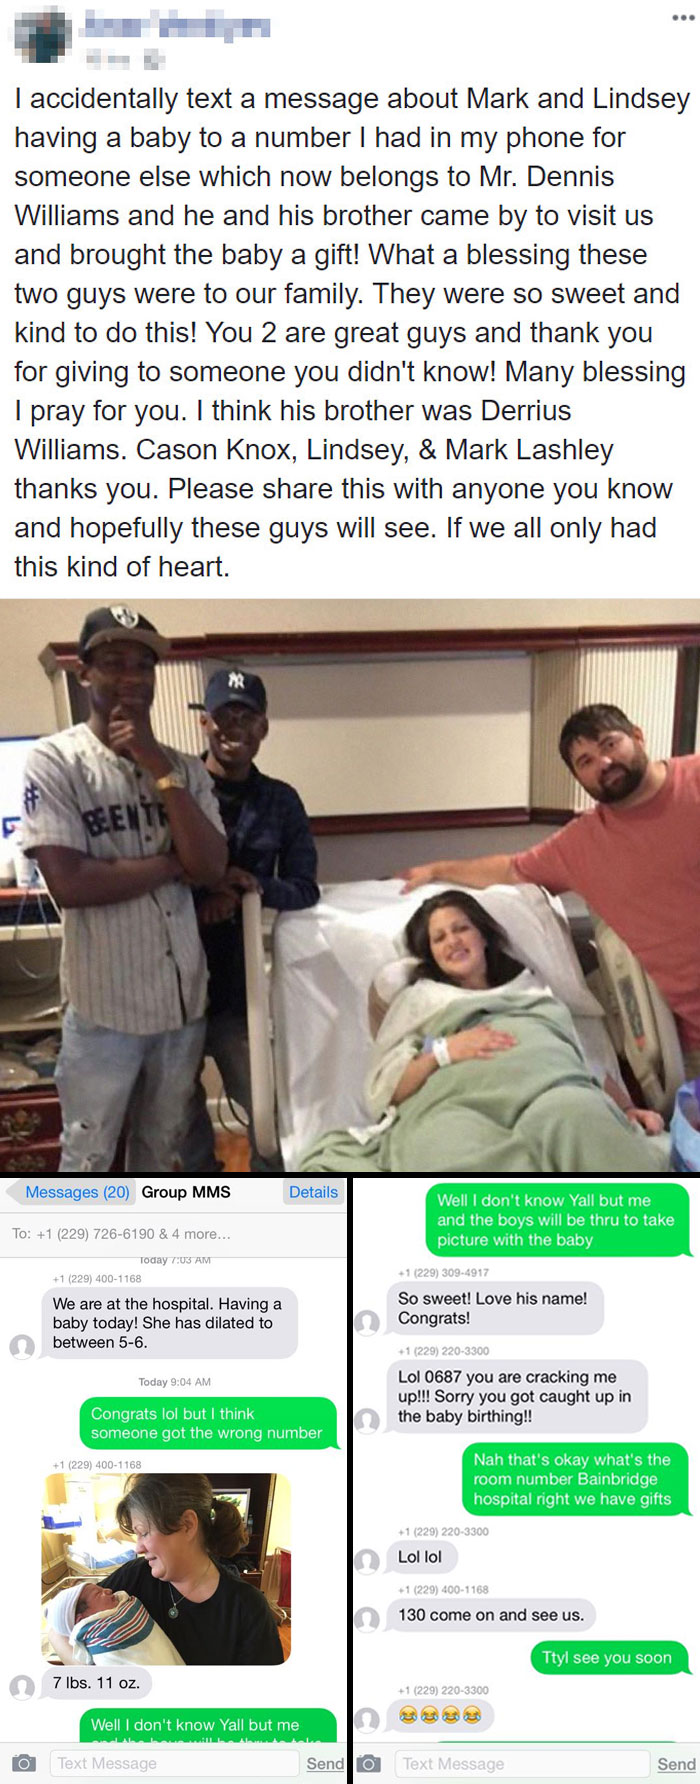 Family Accidentally Texts Baby News To Complete Strangers, That Resulted In Surprise Hospital Visit From Strangers